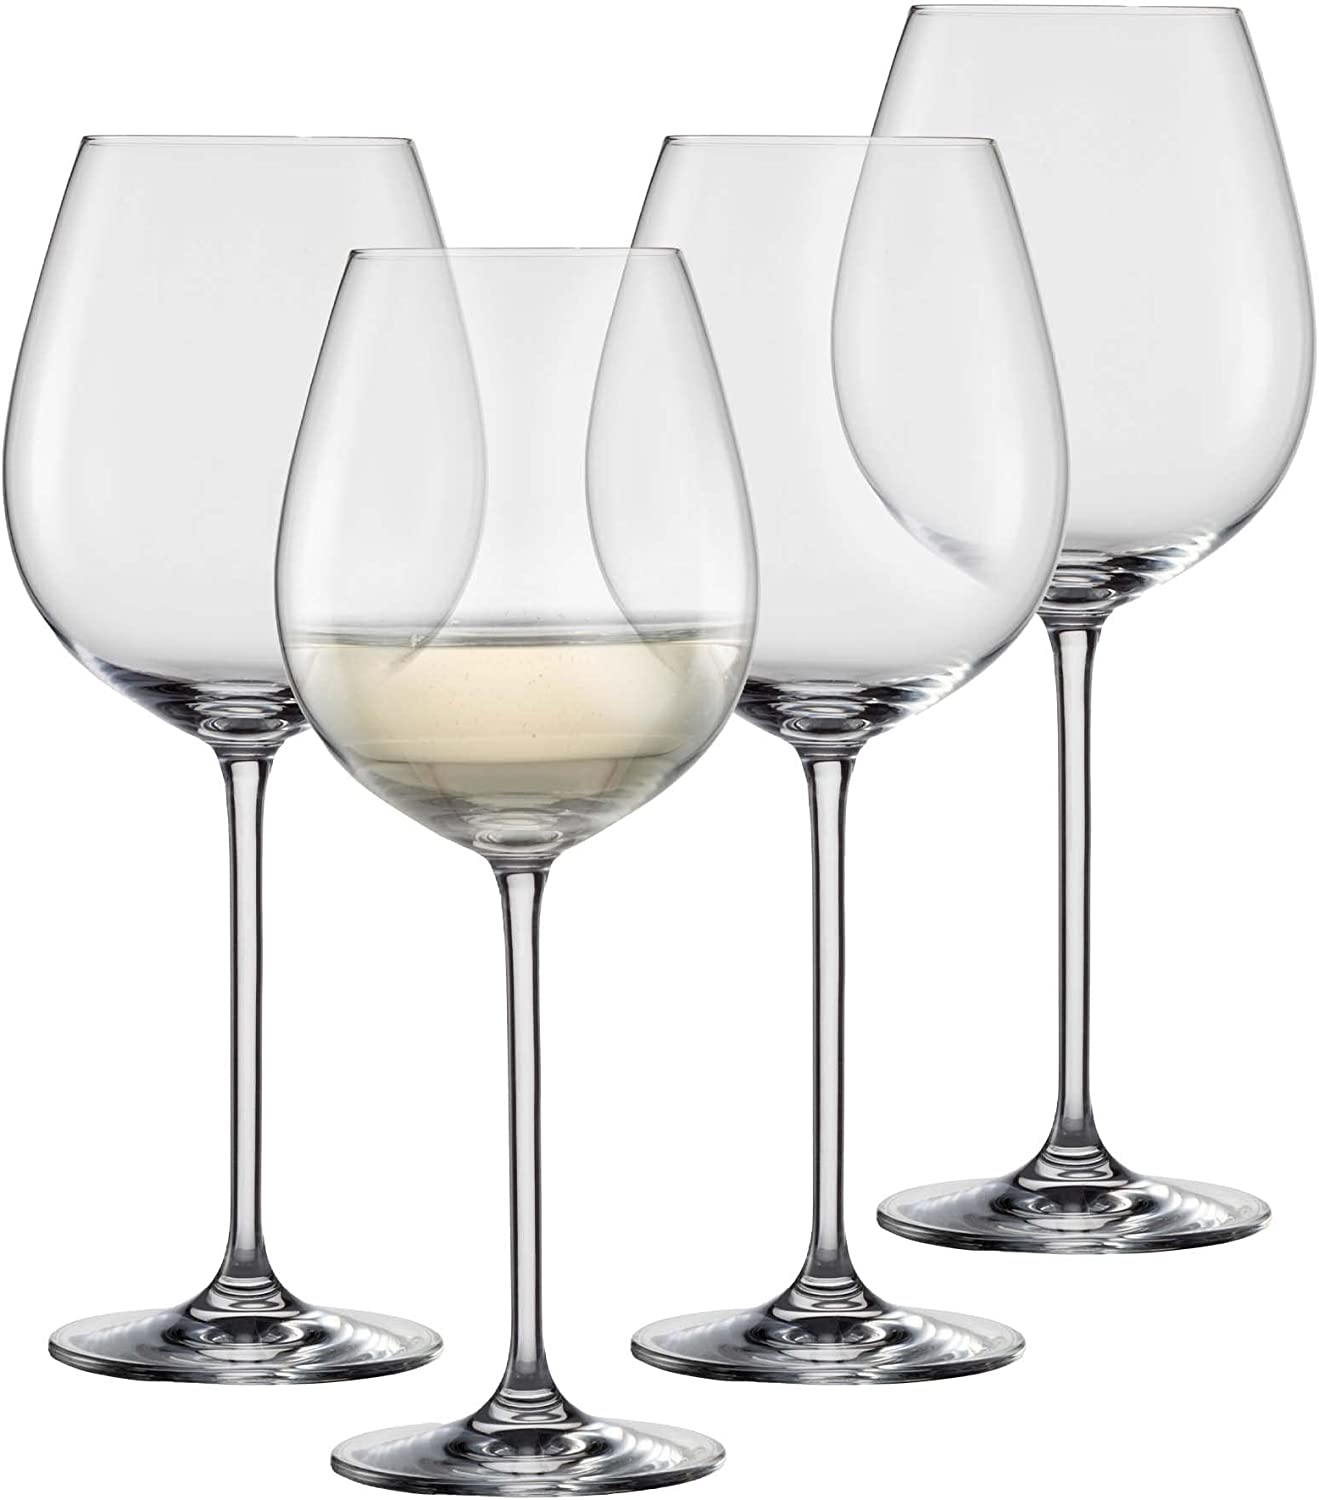 Schott Zwiesel Allround Vinos Wine Glass (Set of 4), Graceful Wine Glasses for Red and White Wine, Dishwasher Safe Tritan Crystal Glasses, Made in Germany (Item No. 130011)